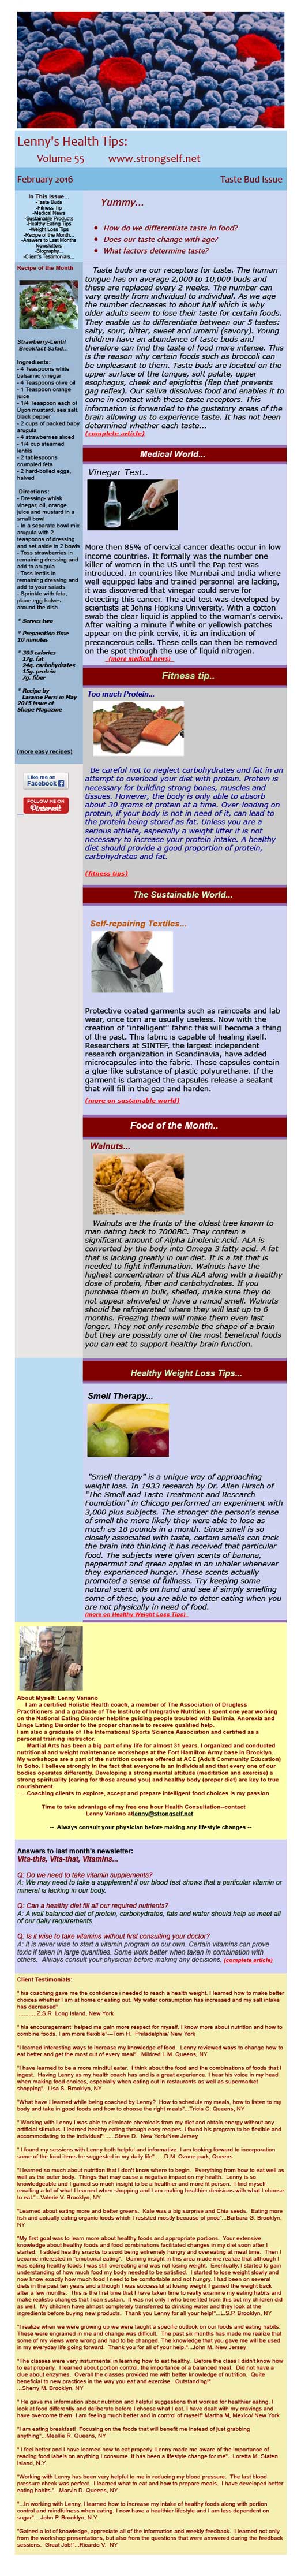 February 2016 Healthy Tips Newsletter from certified Holistic Health Counselor Lenny Variano